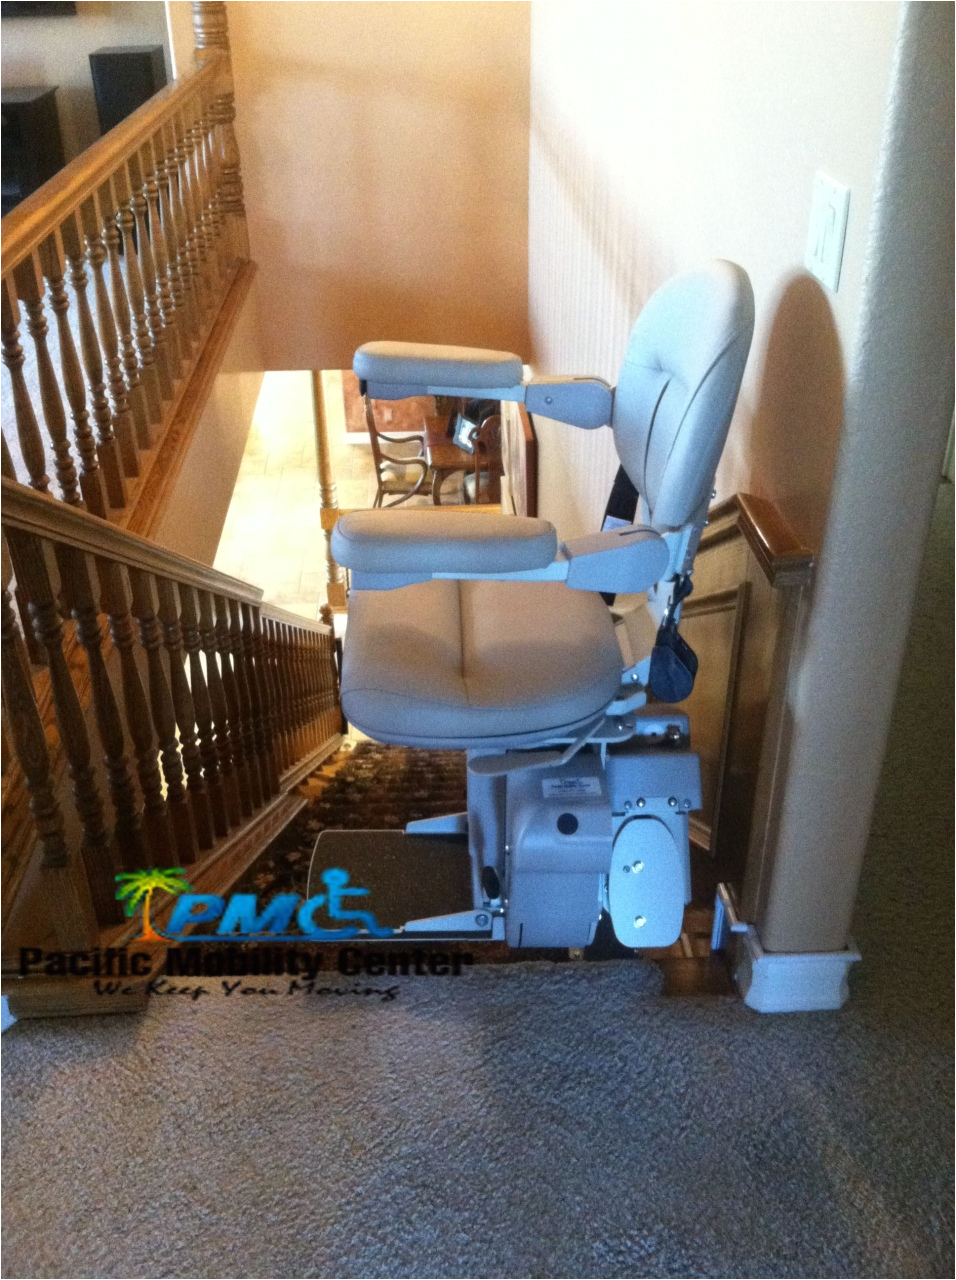 stannah stair lifts foldingrail stairlift in beautiful poway home stairchair of stannah stair lifts jpg